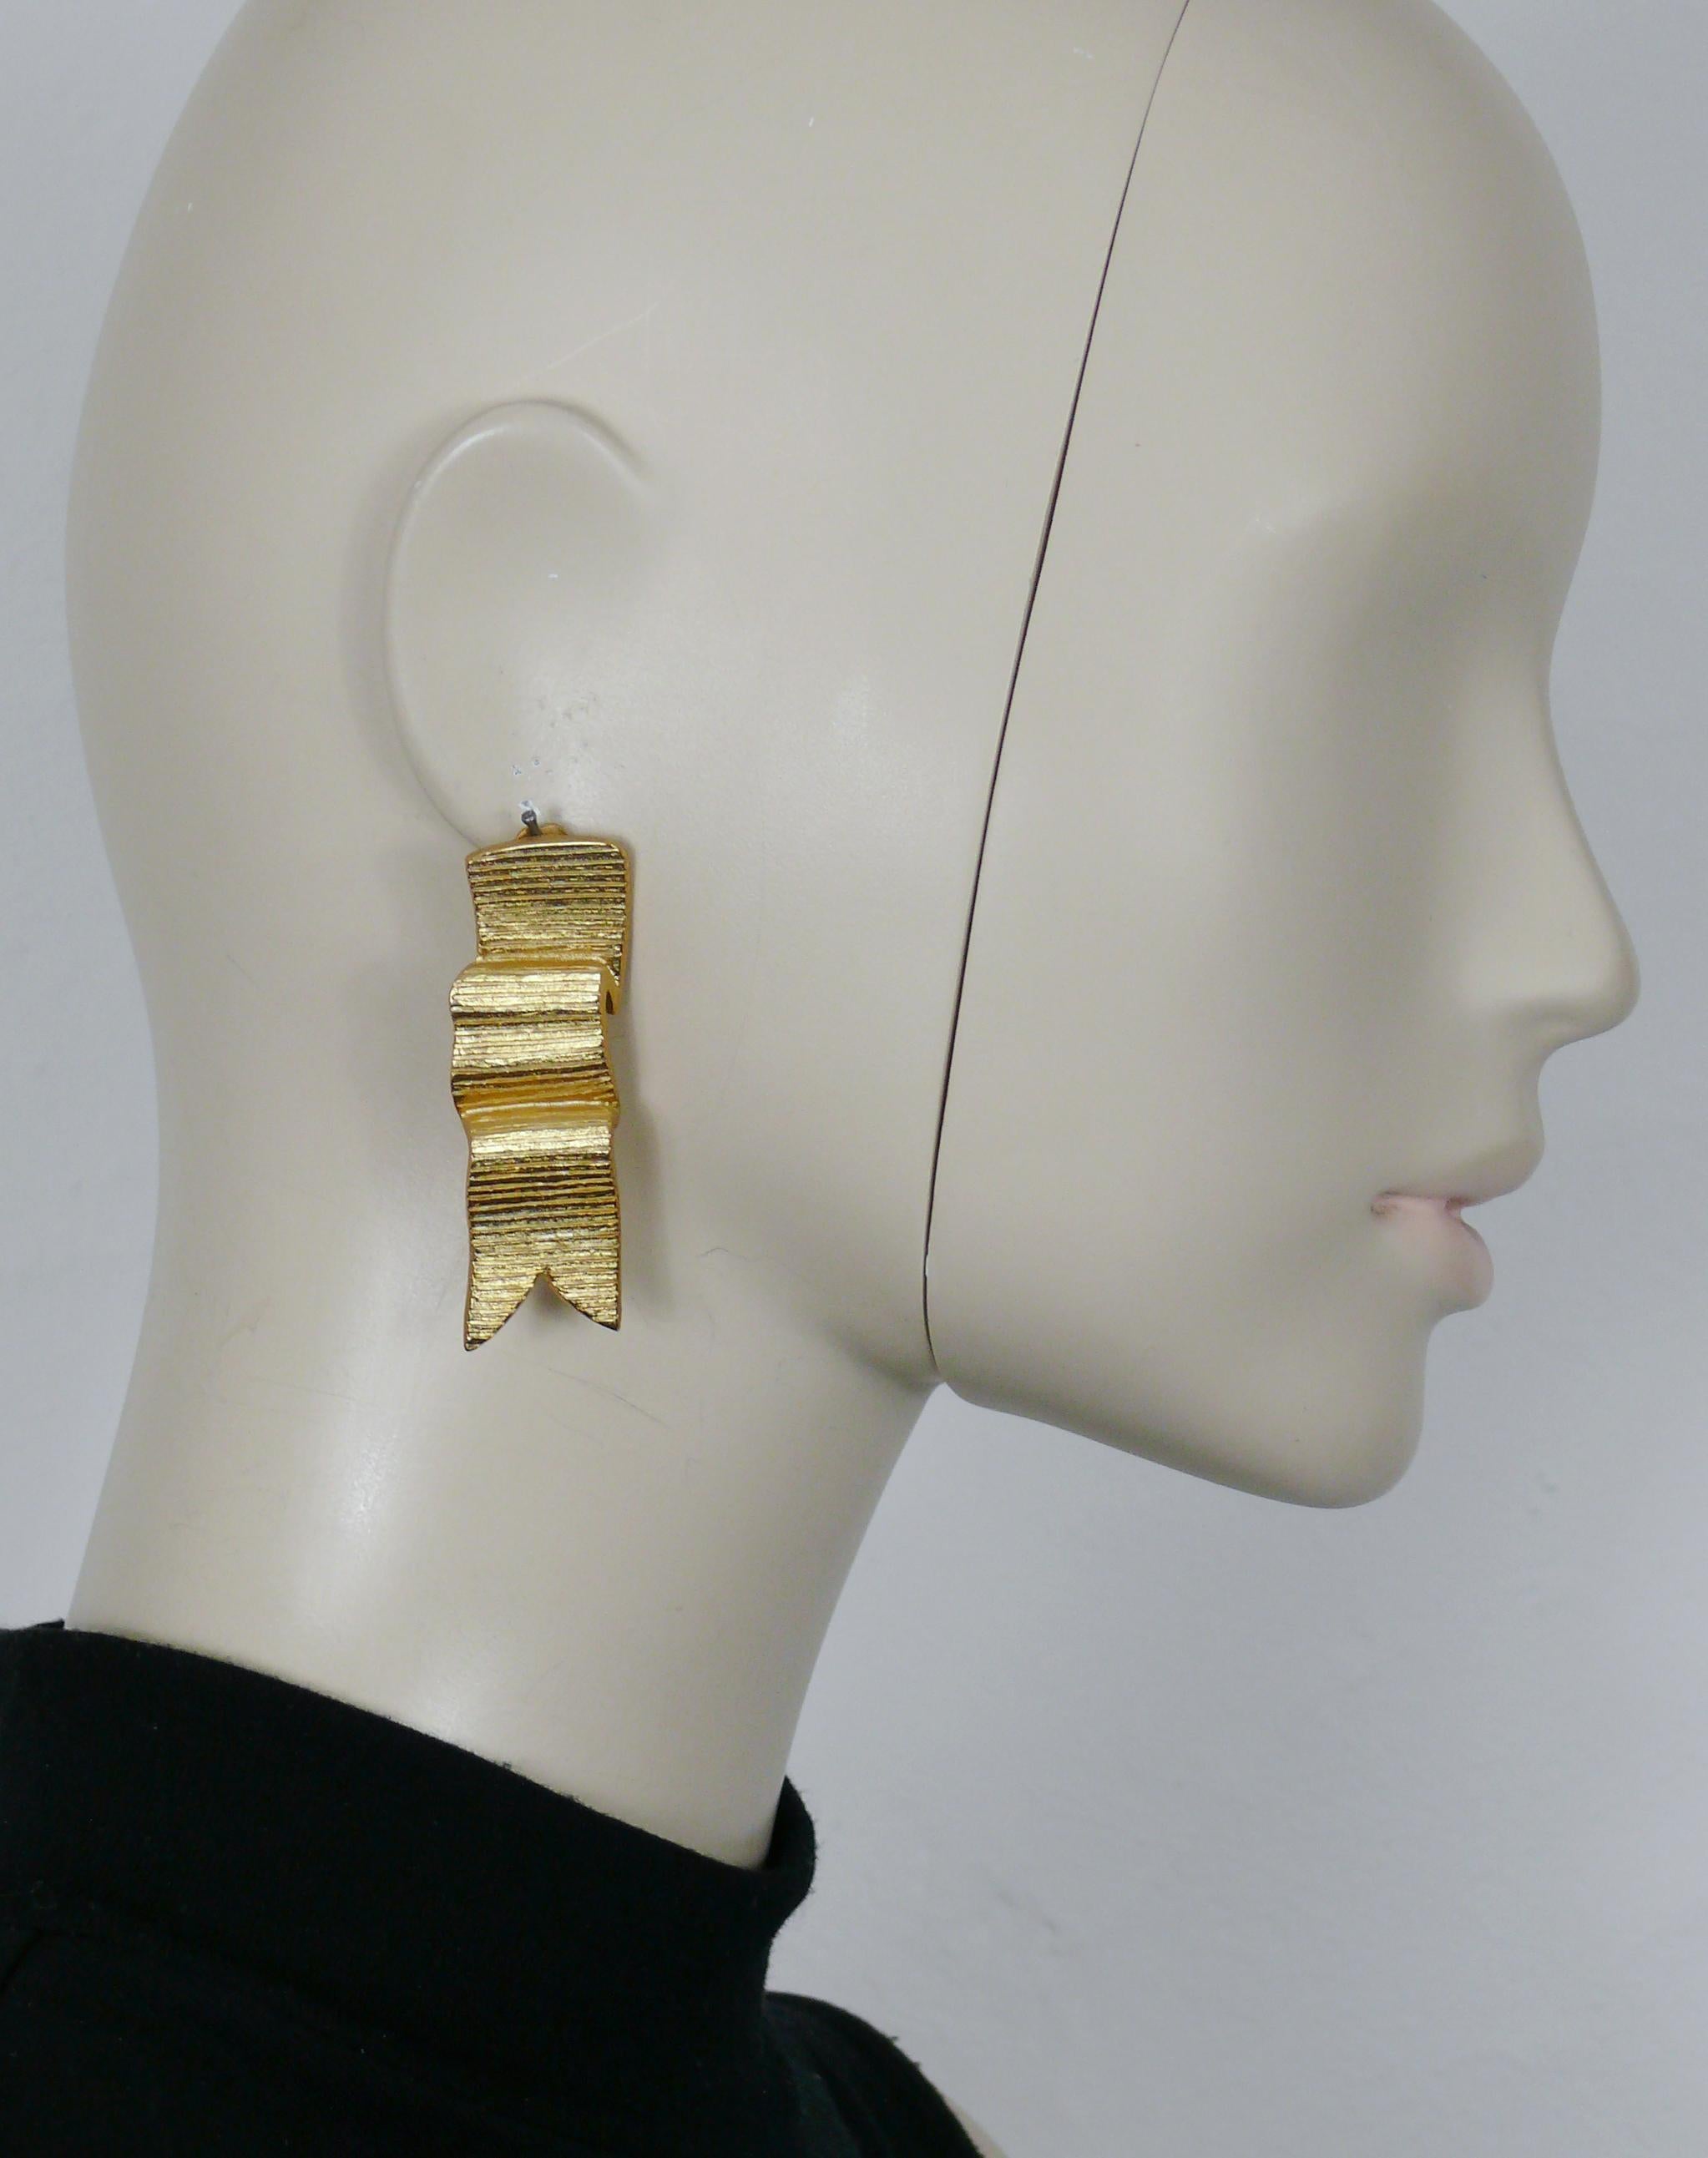 GUY LAROCHE vintage gold tone ribbed textured ribbon clip-on earrings.

Embossed GUY LAROCHE Paris.

Indicative measurements : height approx. 5.7 cm (2.24 inches) / max width approx. 1.8 cm (0.71 inch).

Weight per earring : approx. 14